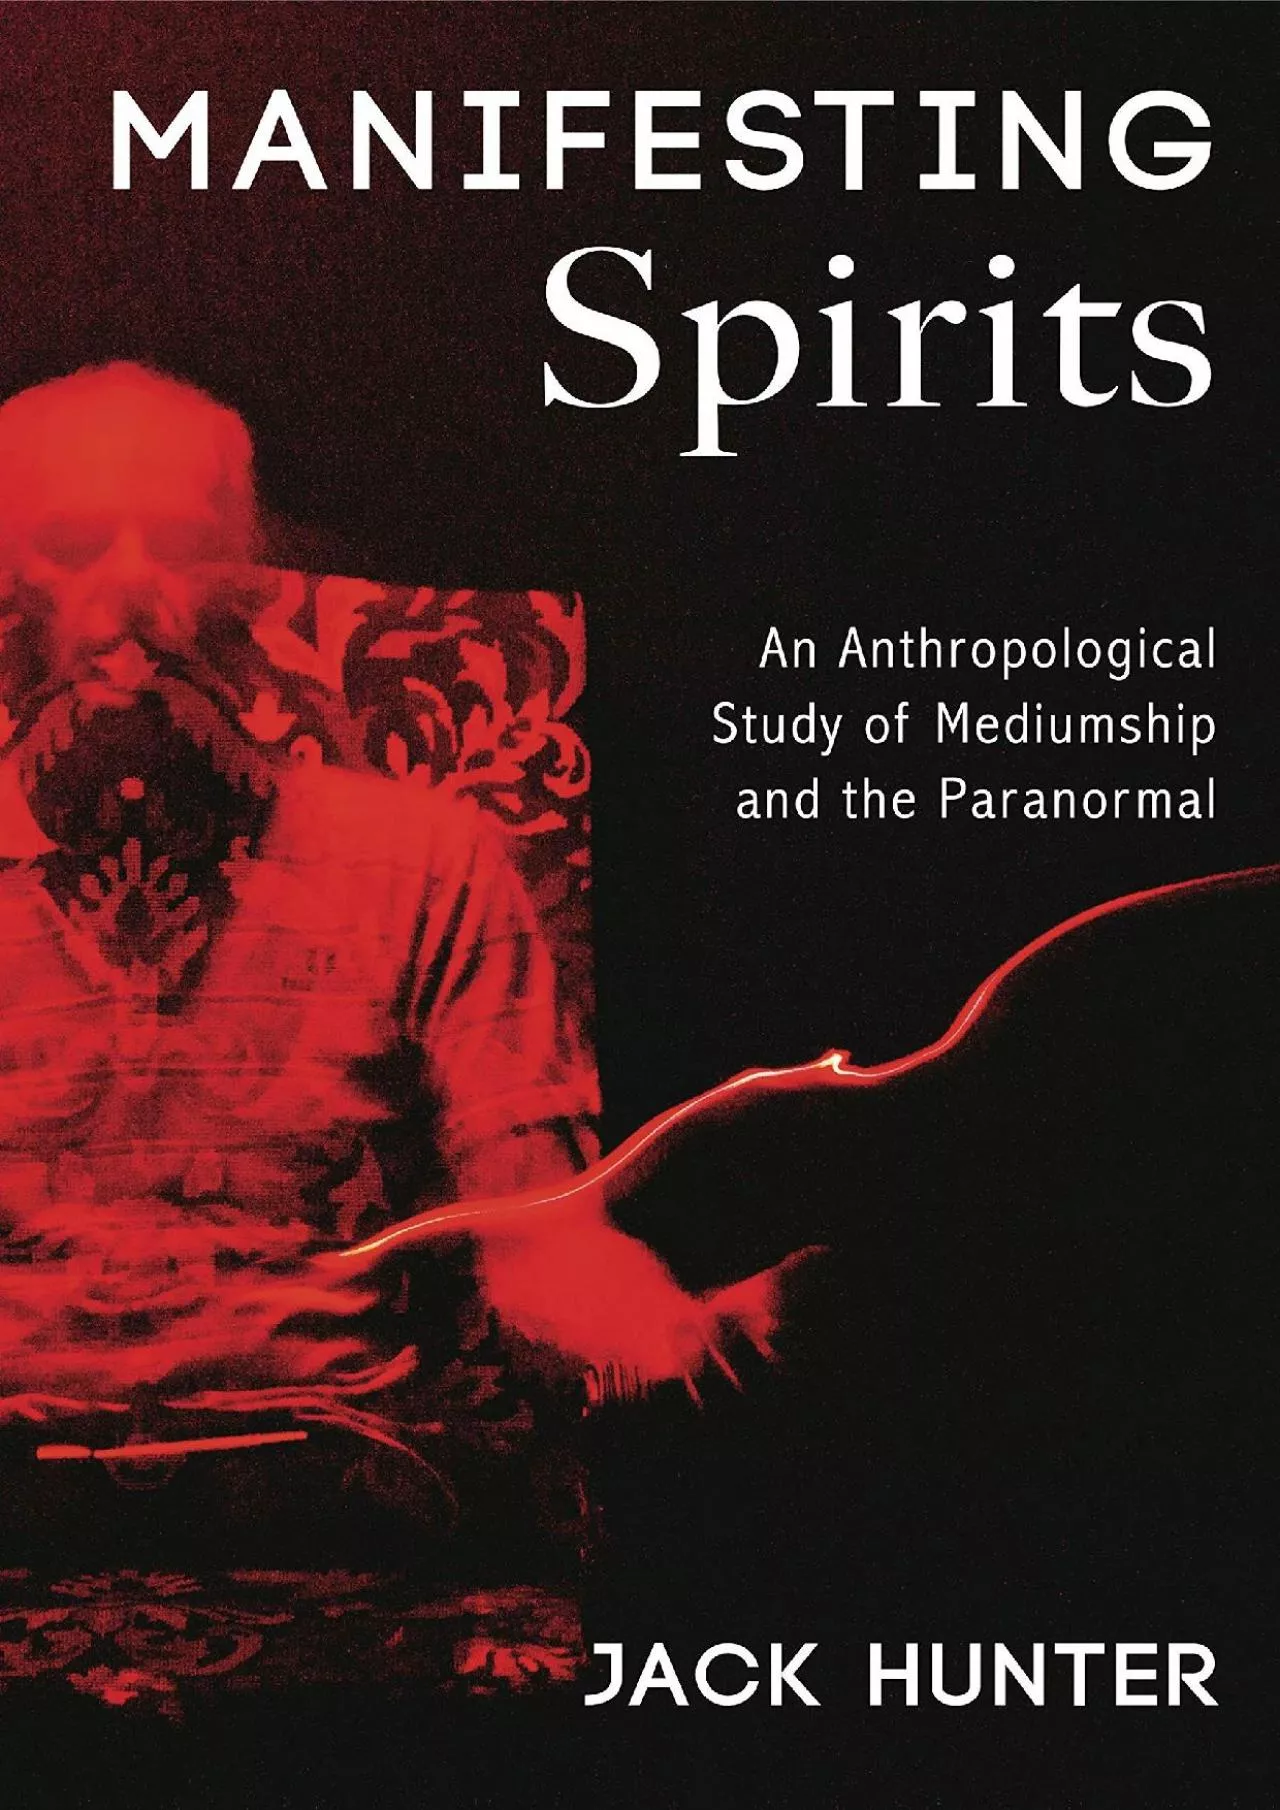 (BOOS)-Manifesting Spirits: An Anthropological Study of Mediumship and the Paranormal